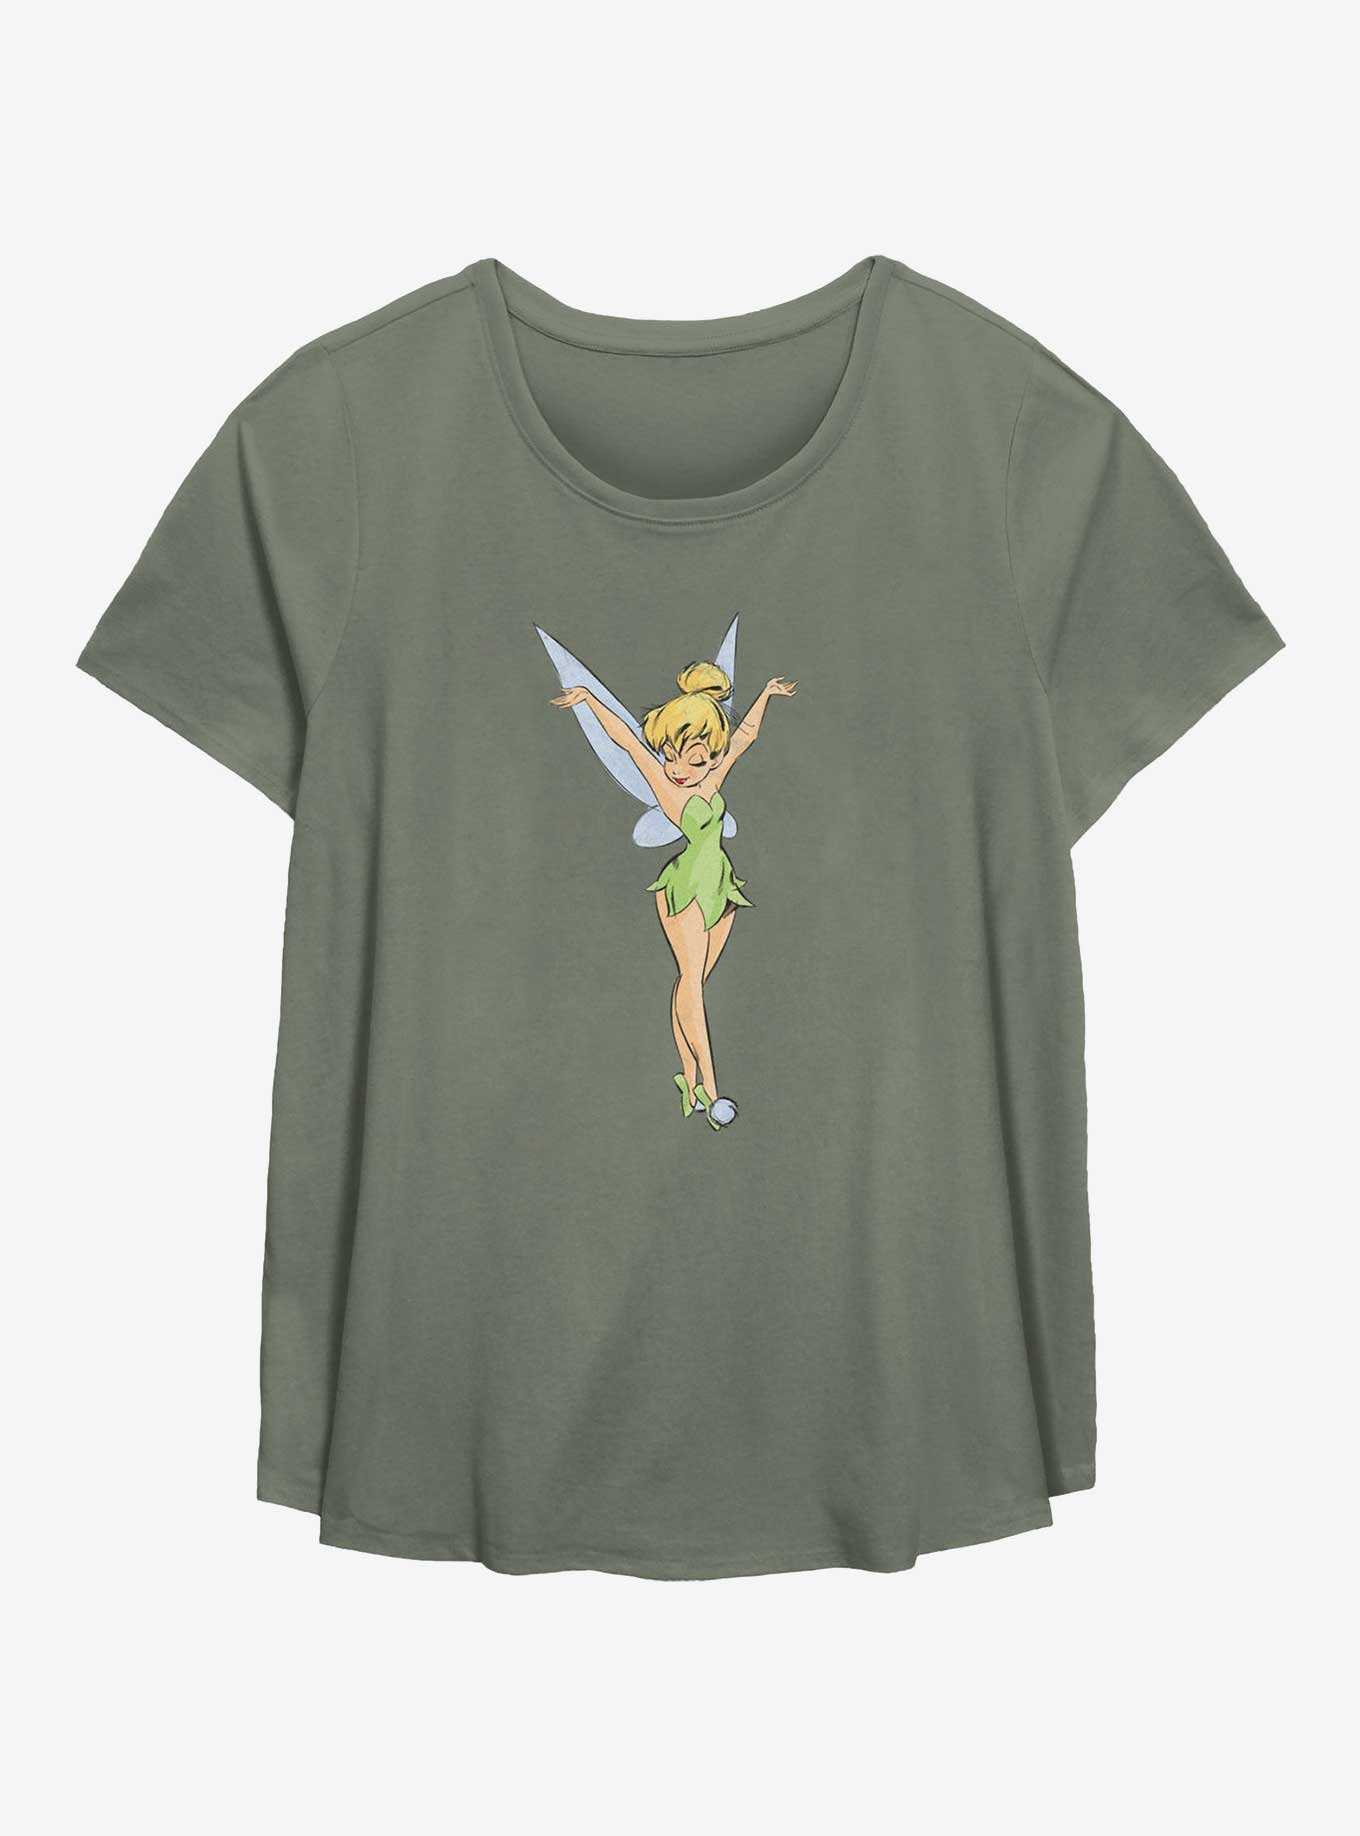 OFFICIAL Peter | Pan & More Shirts Merchandise, Hot Topic